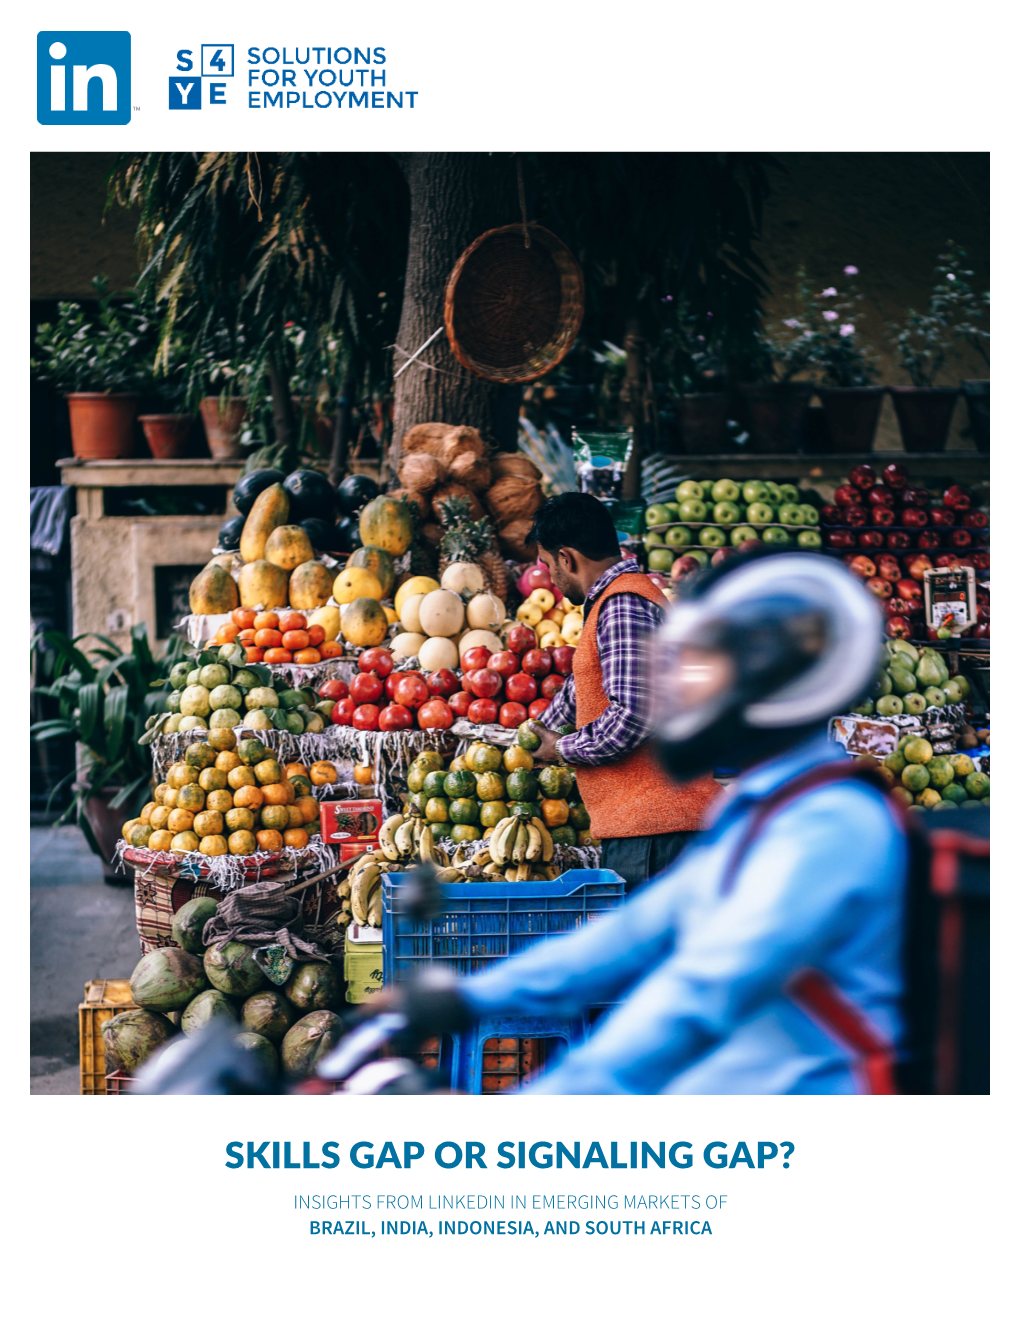 Skills Gap Or Signaling Gap? Insights from Linkedin in Emerging Markets of Brazil, India, Indonesia,1 and South Africa